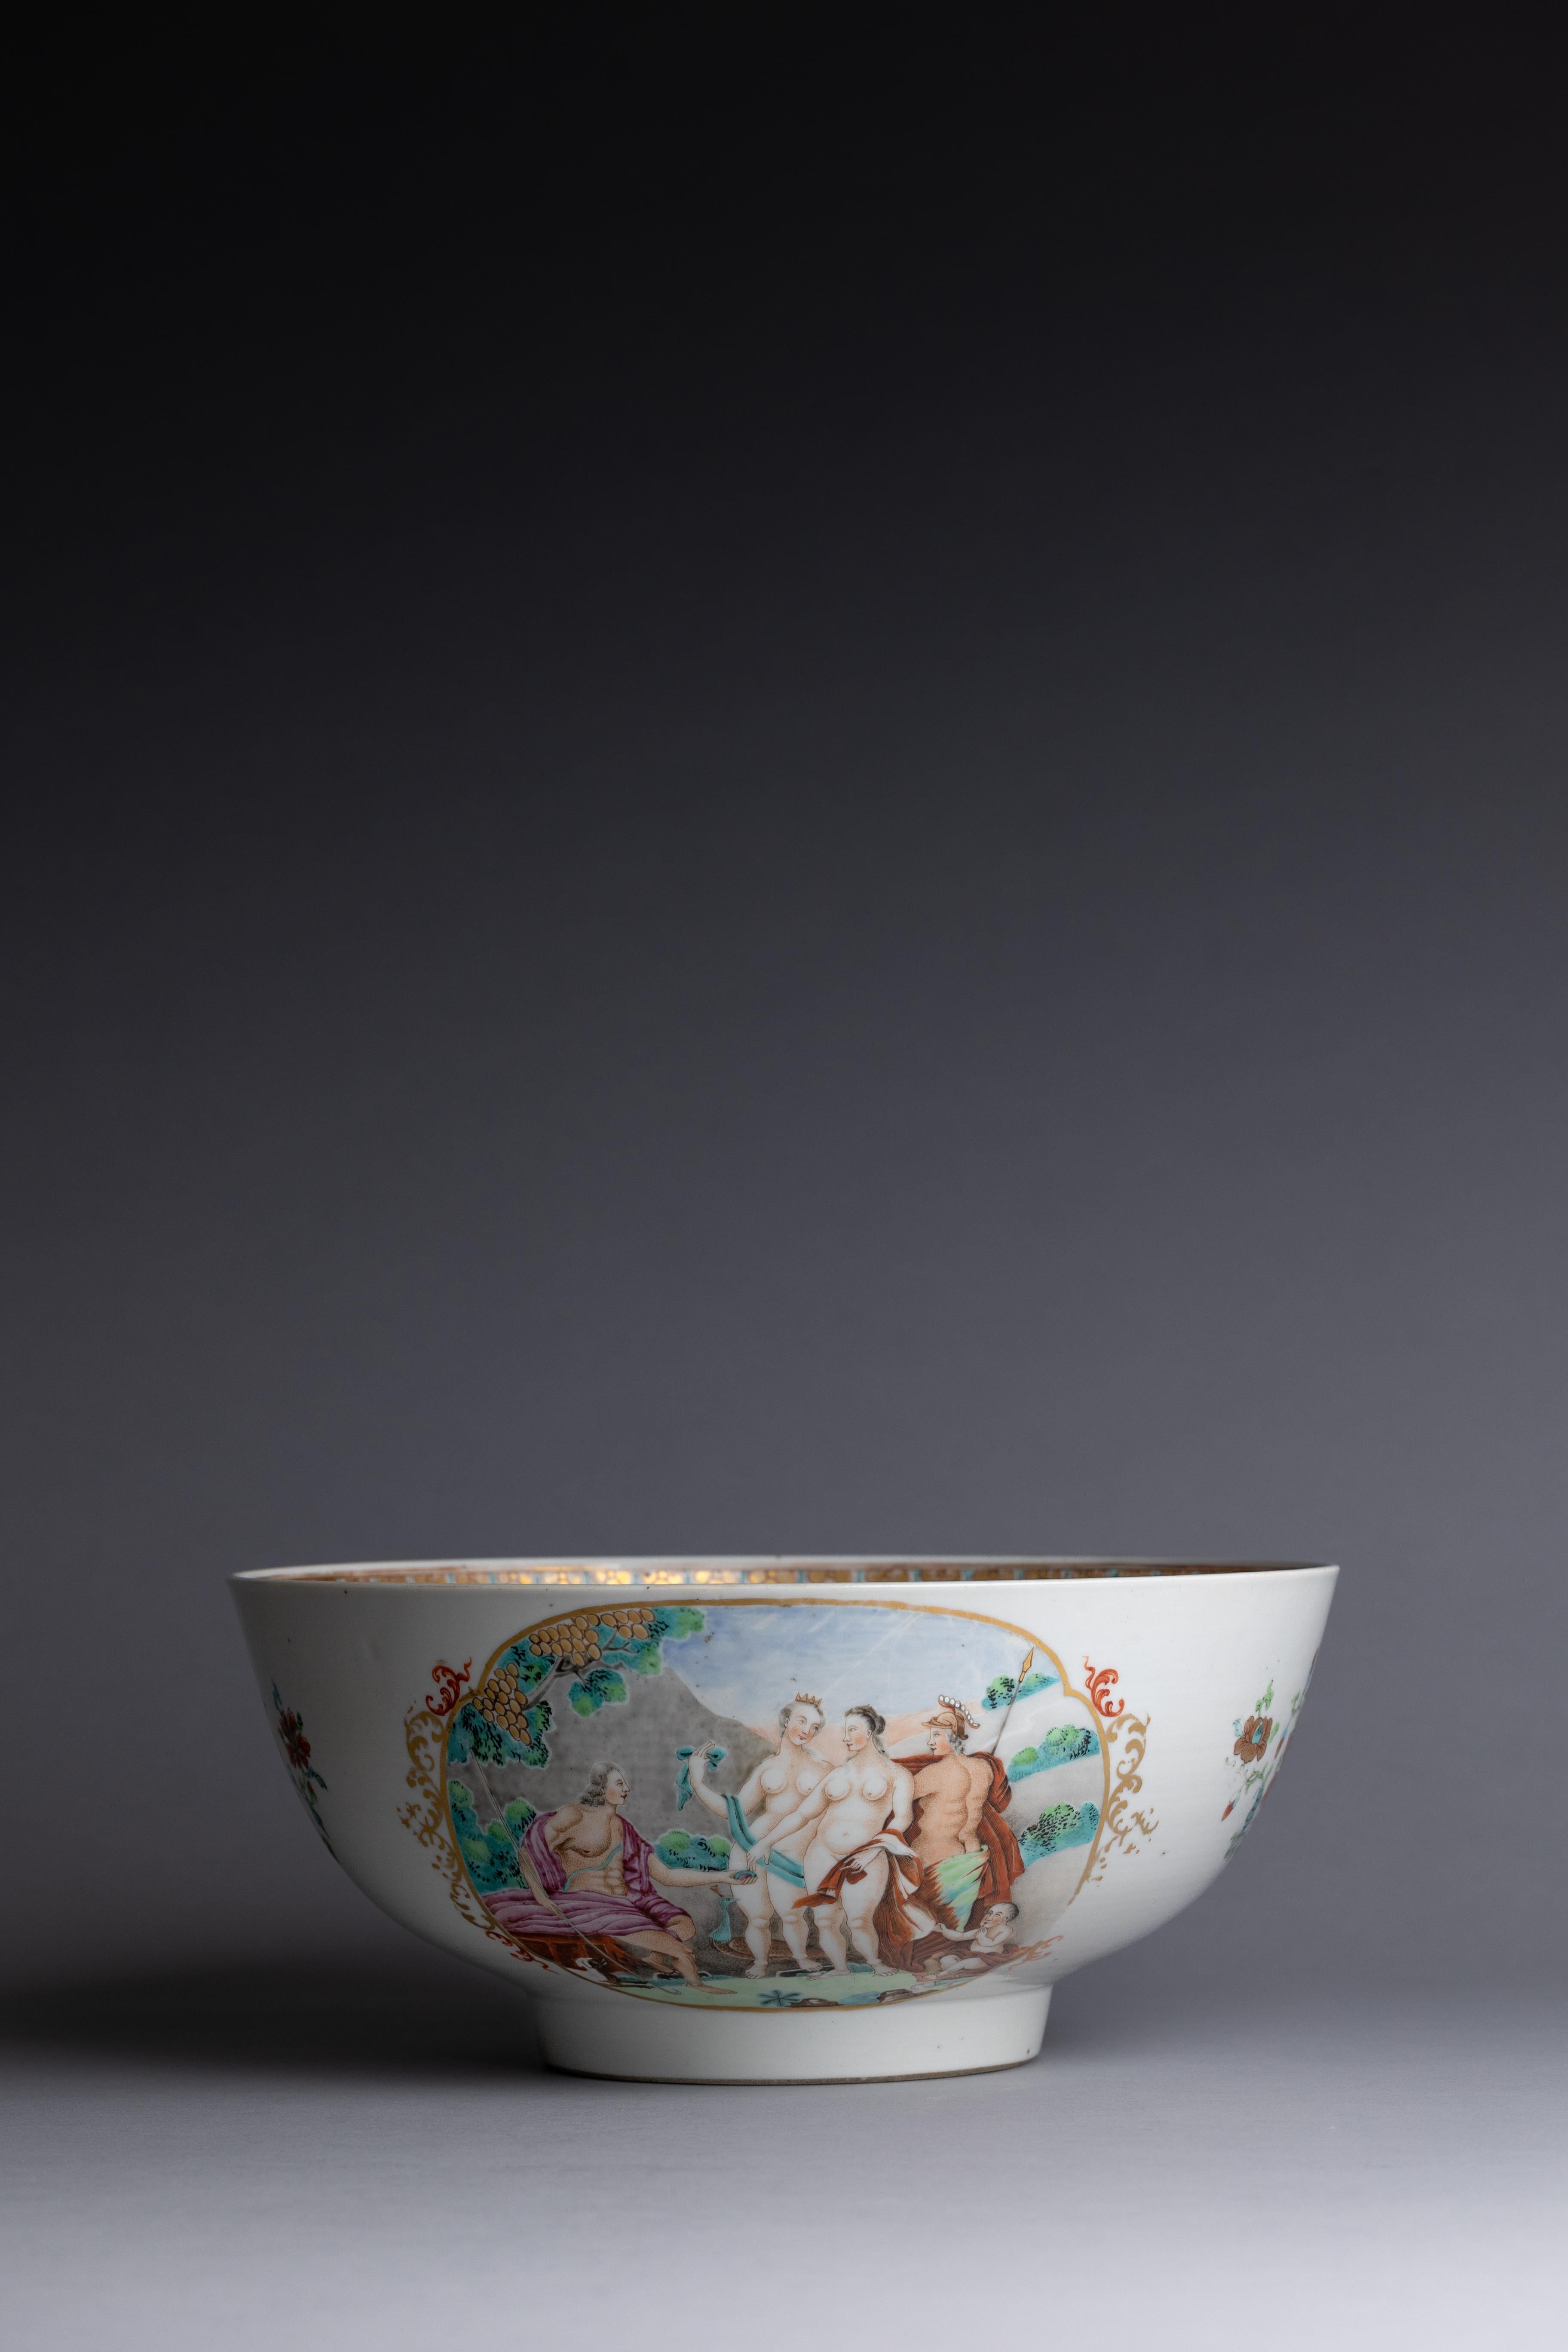 A mid-18th century Chinese export porcelain punch bowl, hand-painted with 